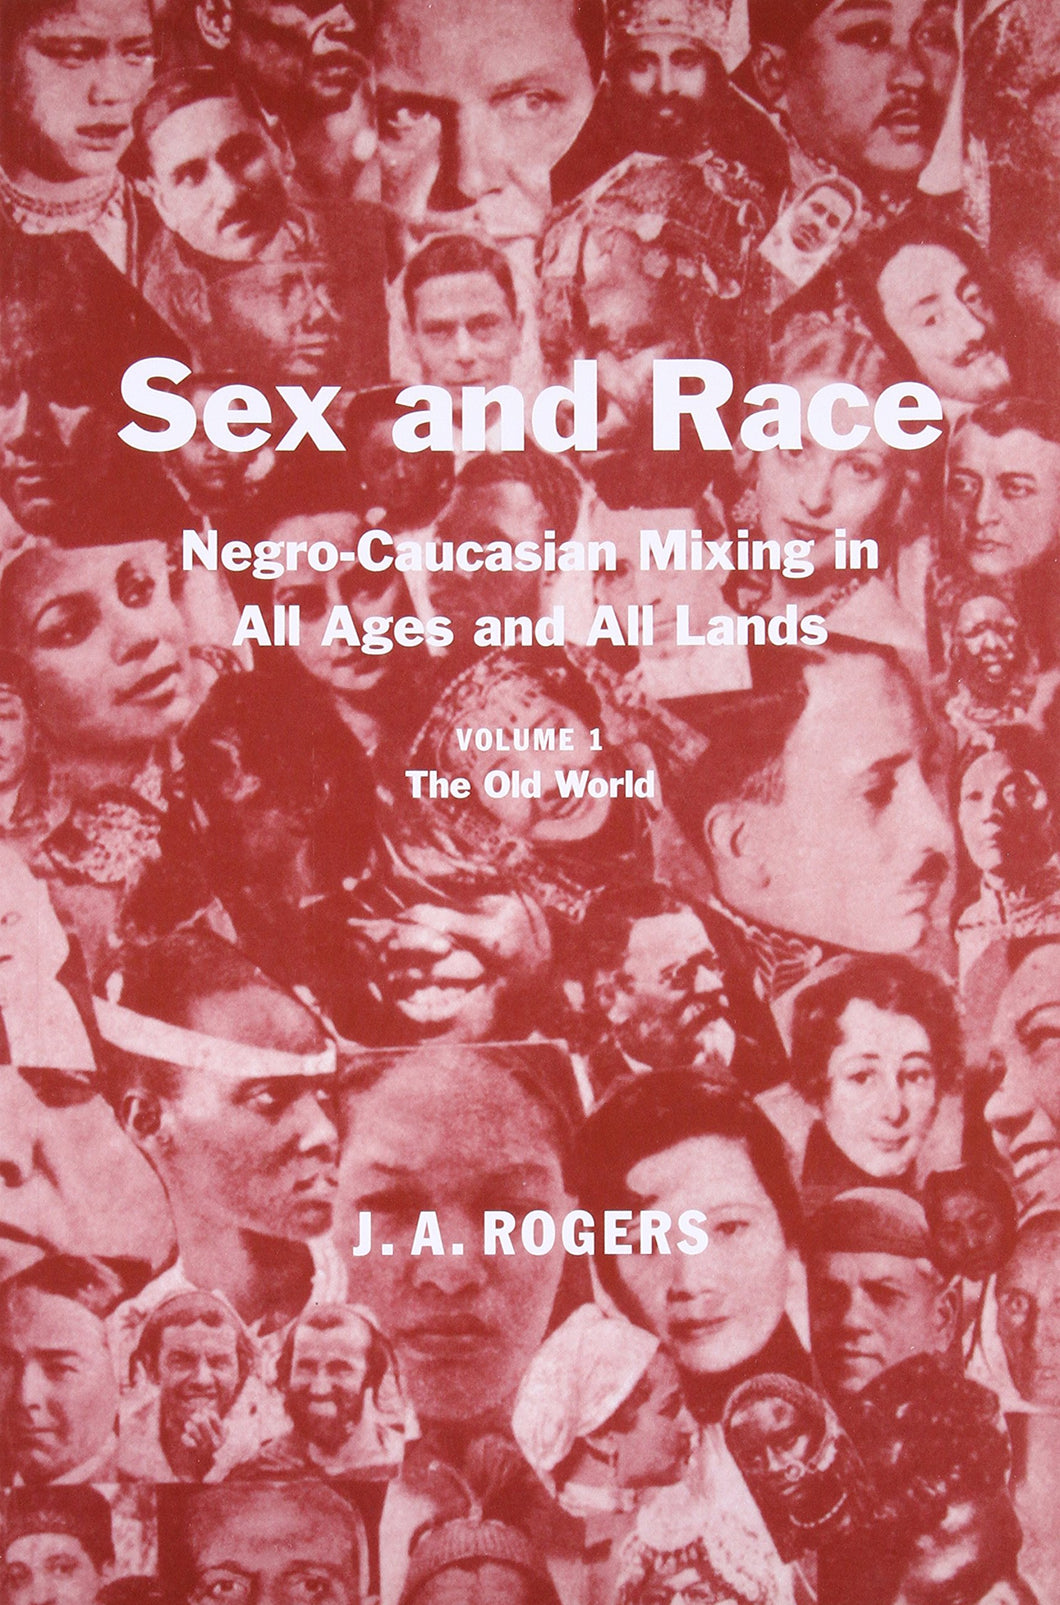 Sex and Race, Volume 1: Negro-Caucasian Mixing in All Ages and All Lands ― The Old World by J. A. Rogers